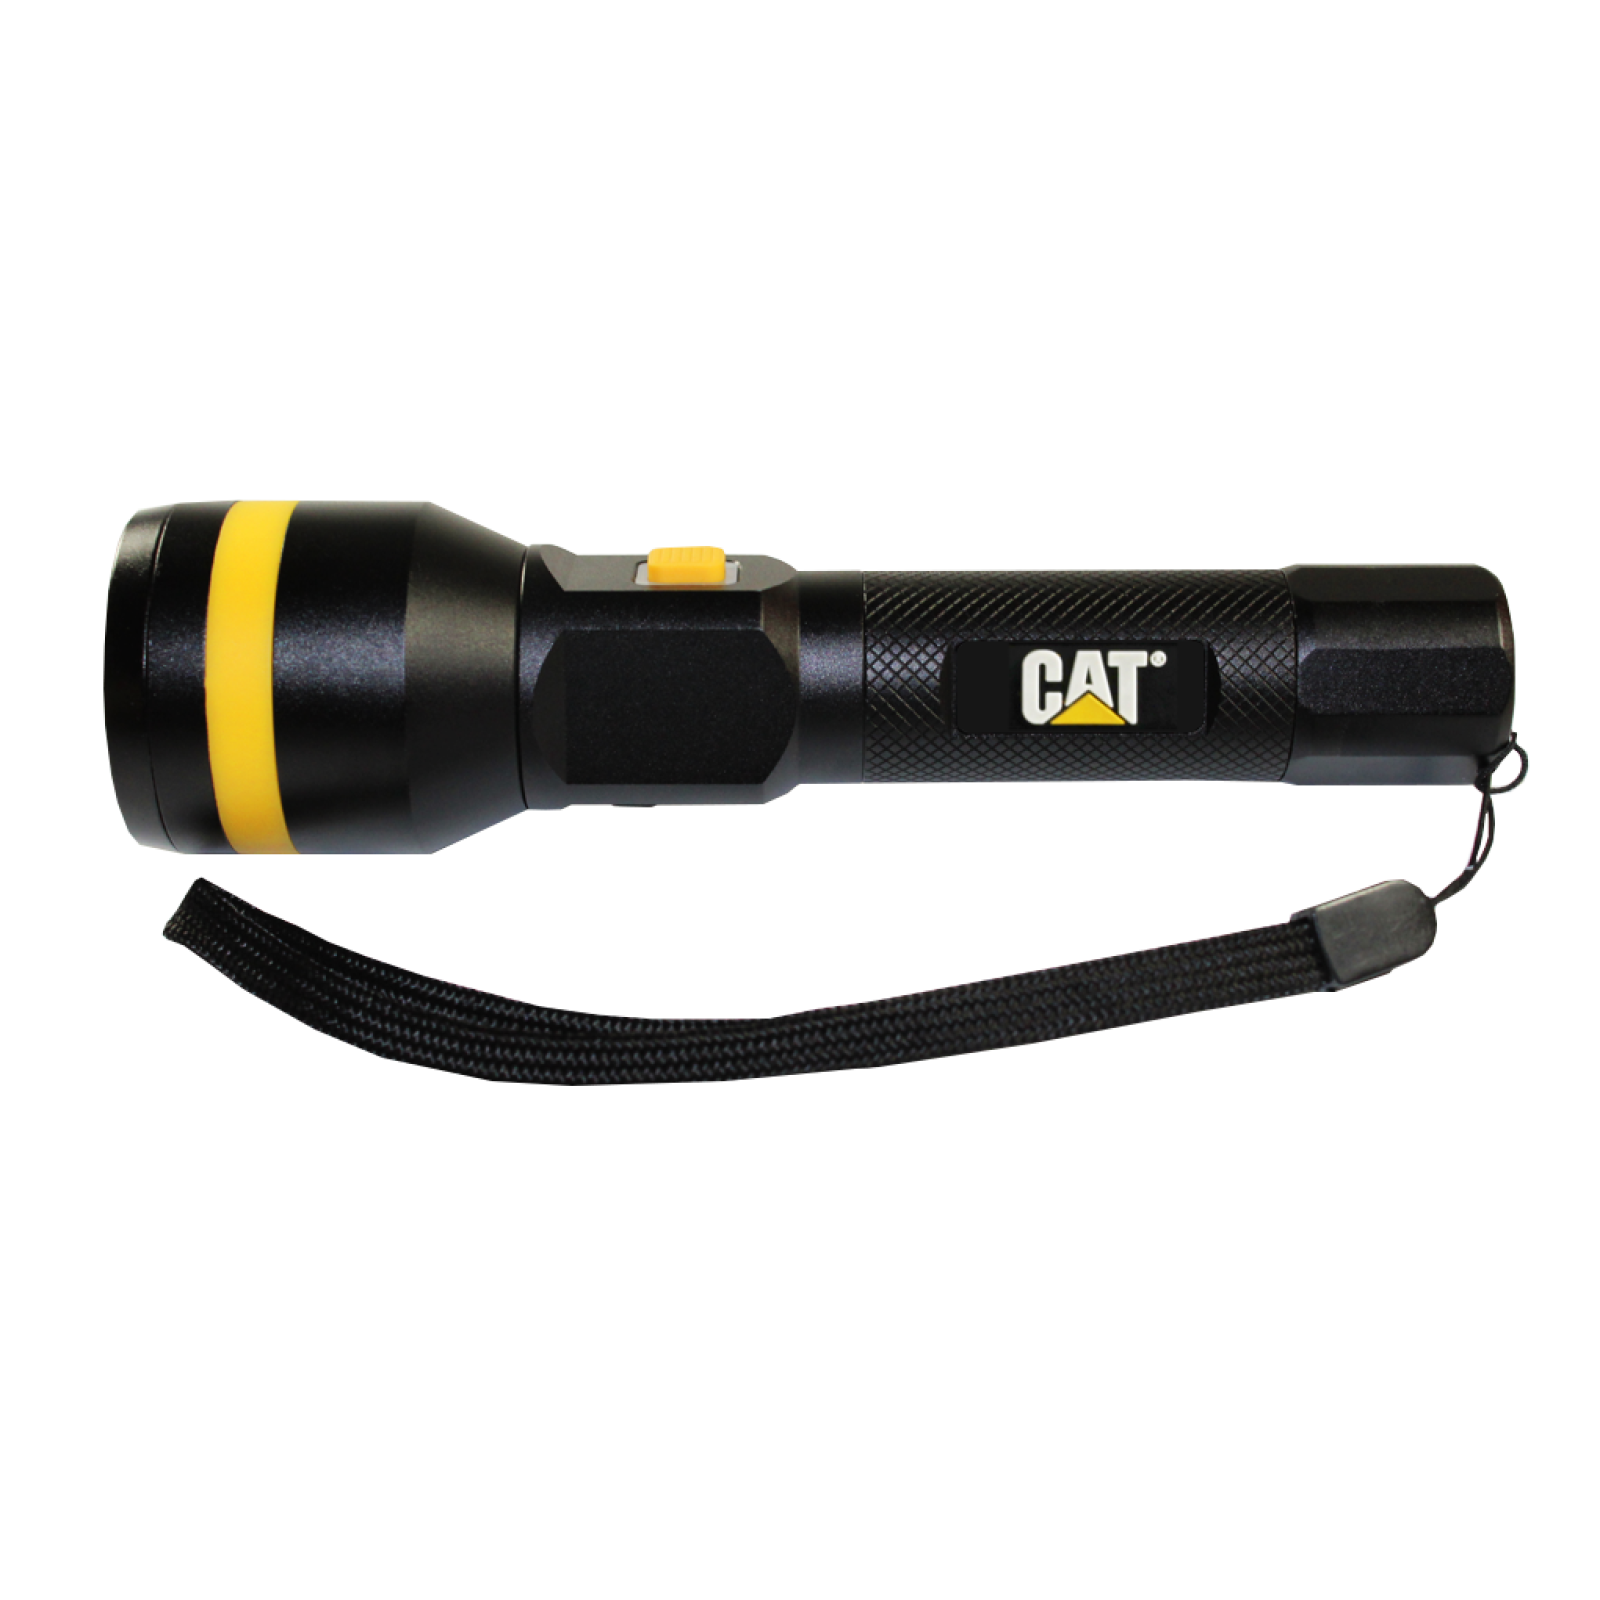 Фенер CAT CT24565, Rechargeable, USB In+Out, Focusing Tatical Lights, 700lm, Черен